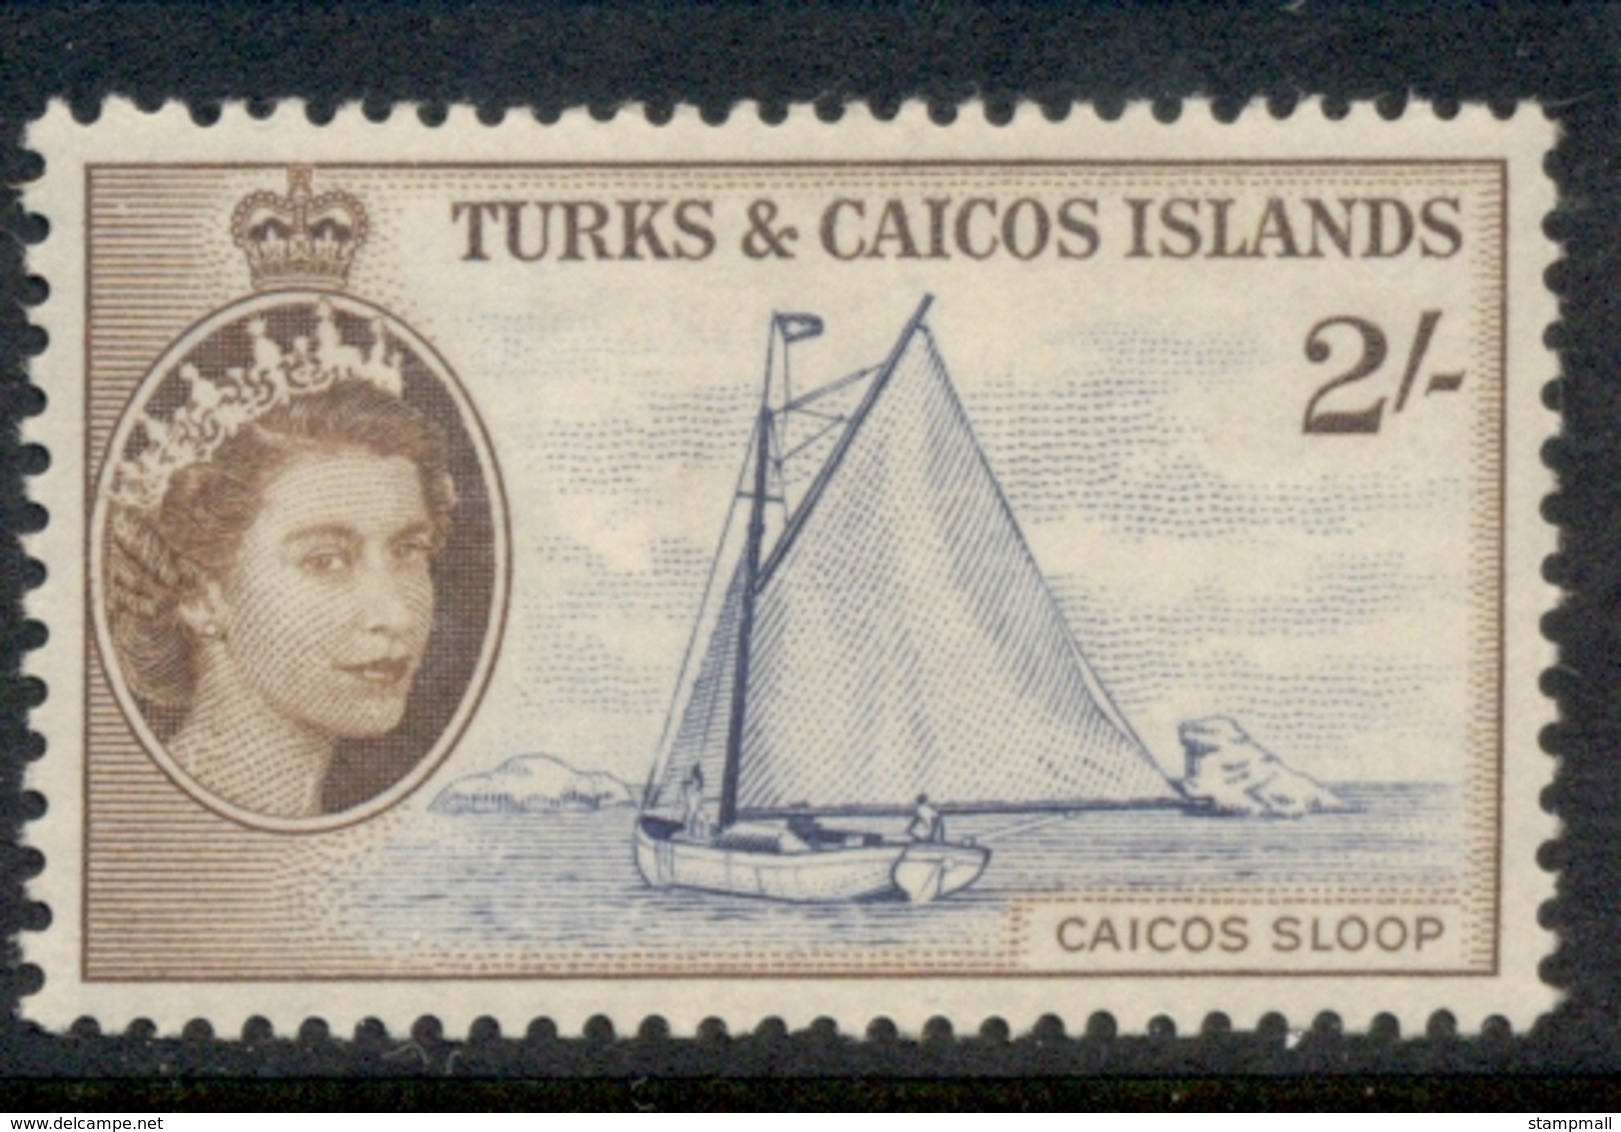 Turks & Caicos Is 1957-60 QEII Pictorial, 2/- Caicos Sloop MLH - Turks And Caicos